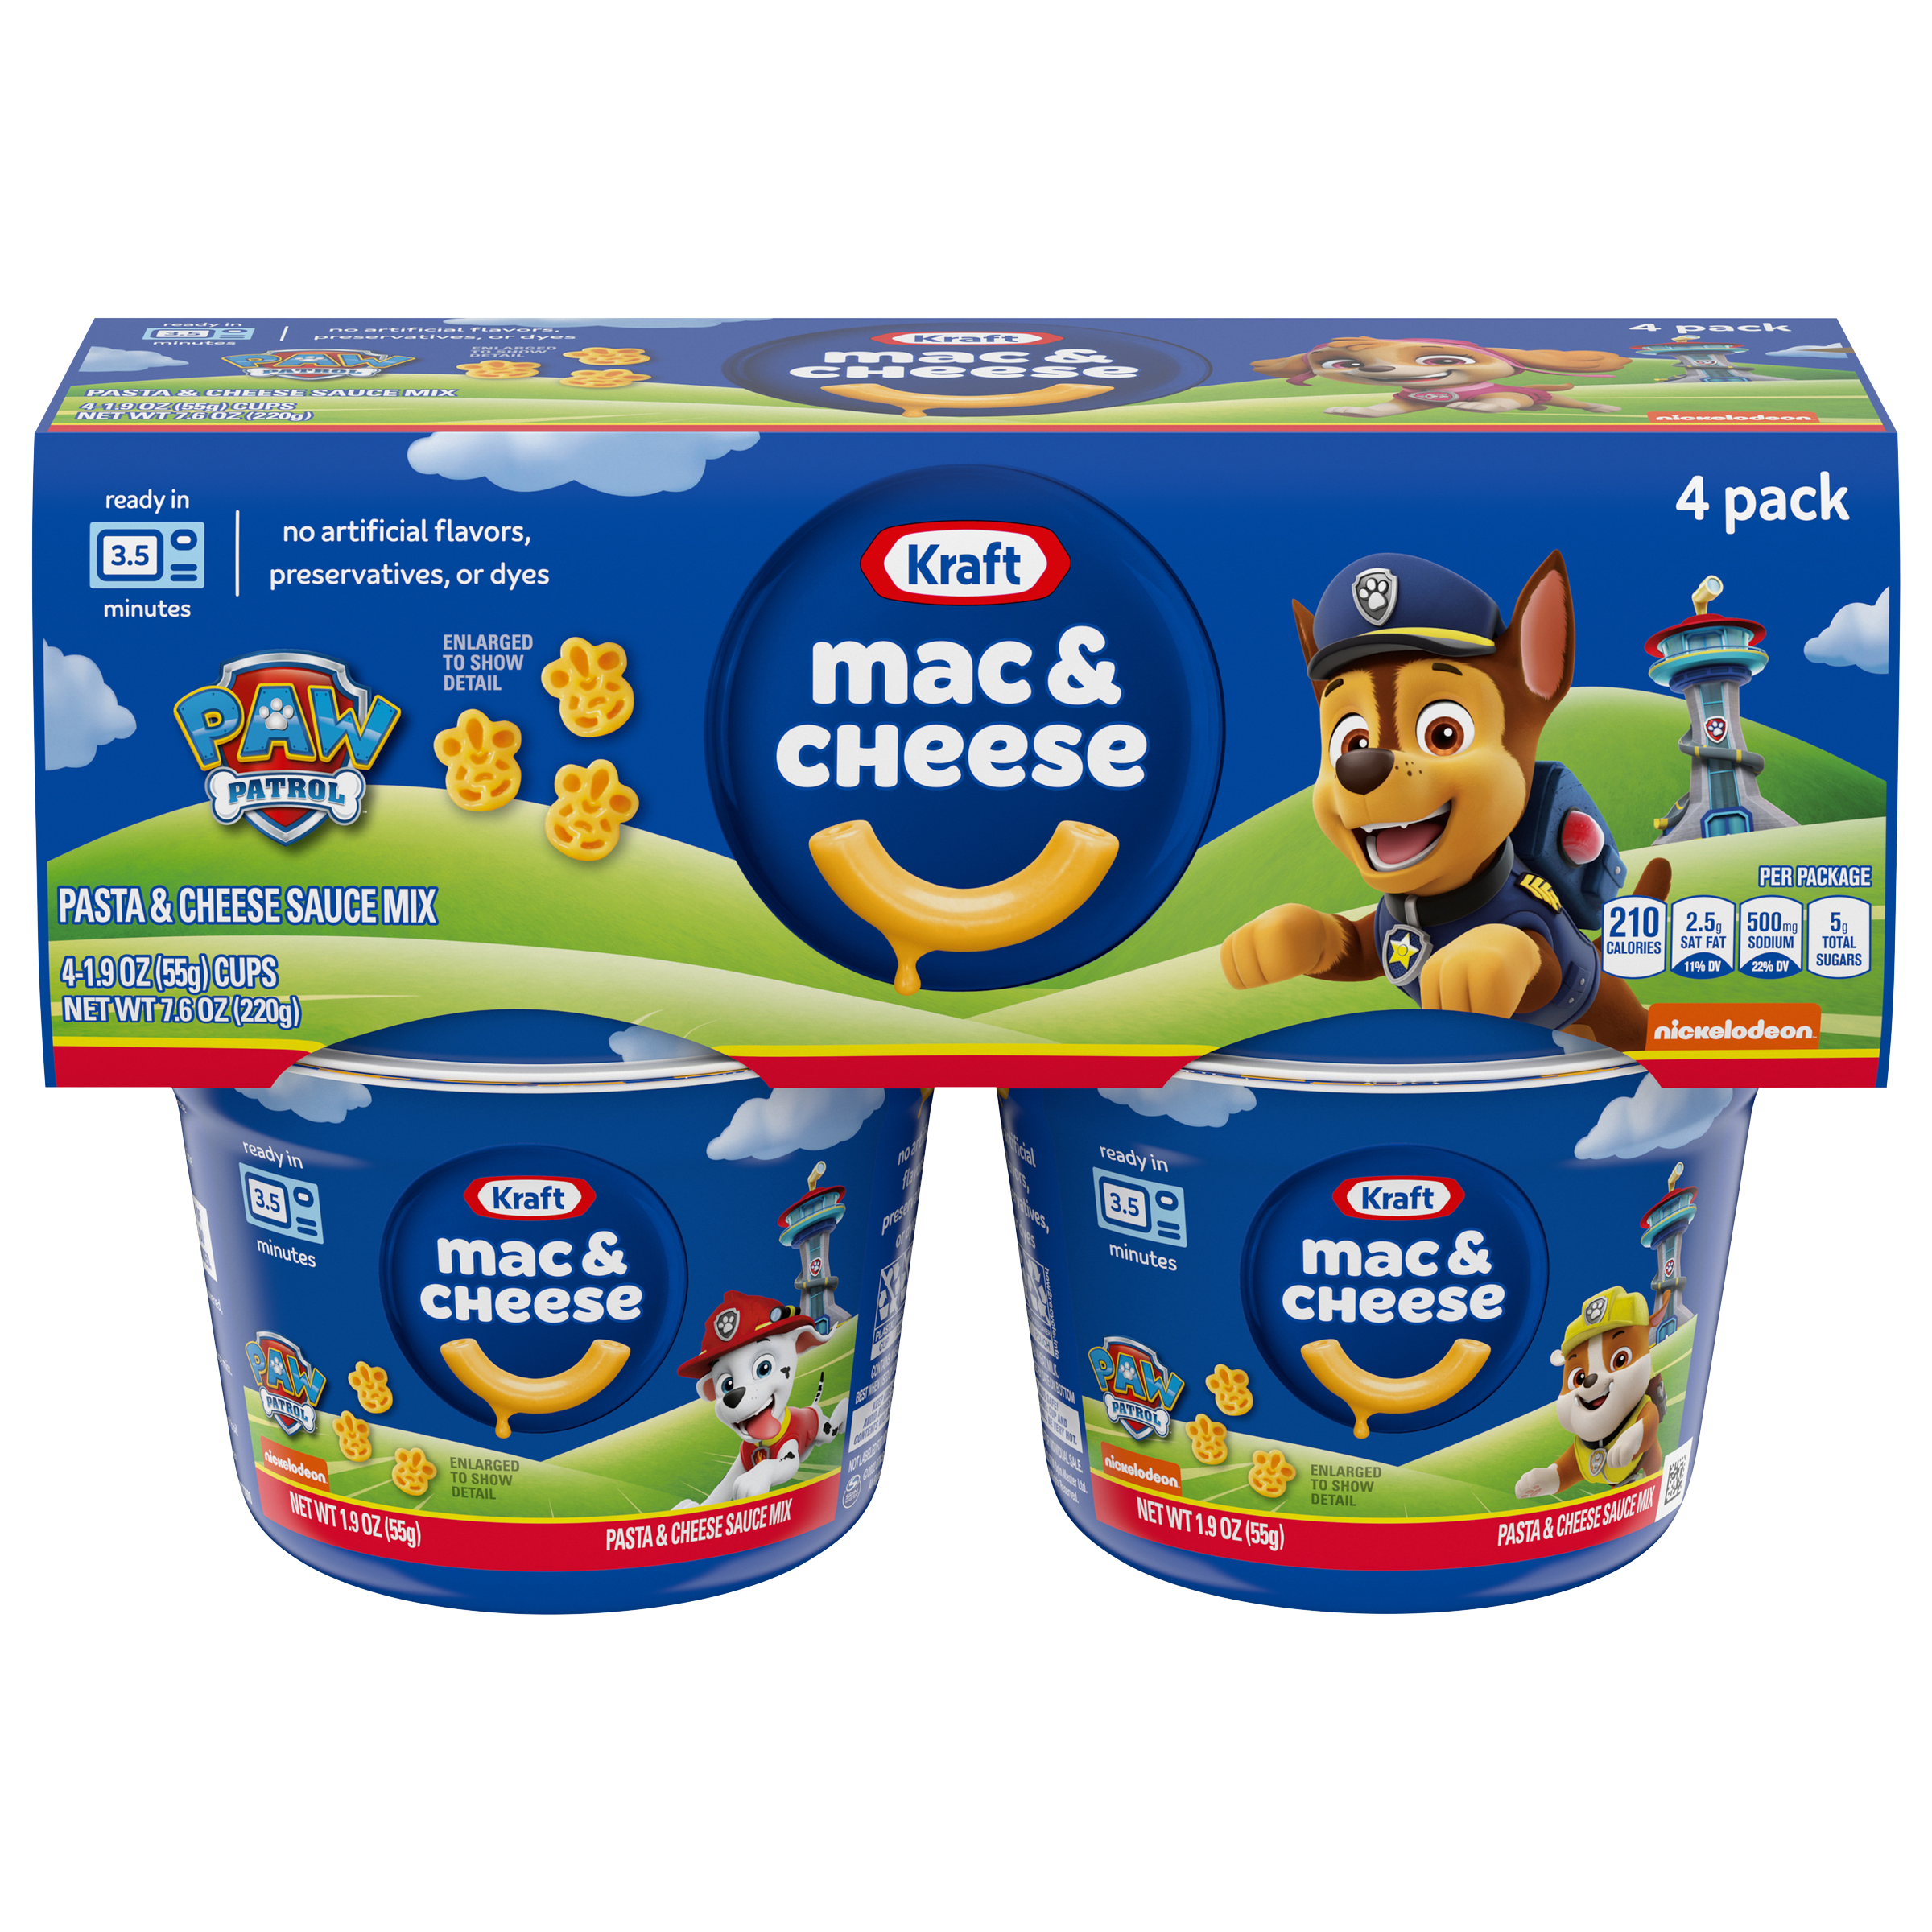 Mac & Cheese Macaroni and Cheese Dinner Easy Microwavable Dinner with Nickelodeon Paw Patrol Pasta Shapes